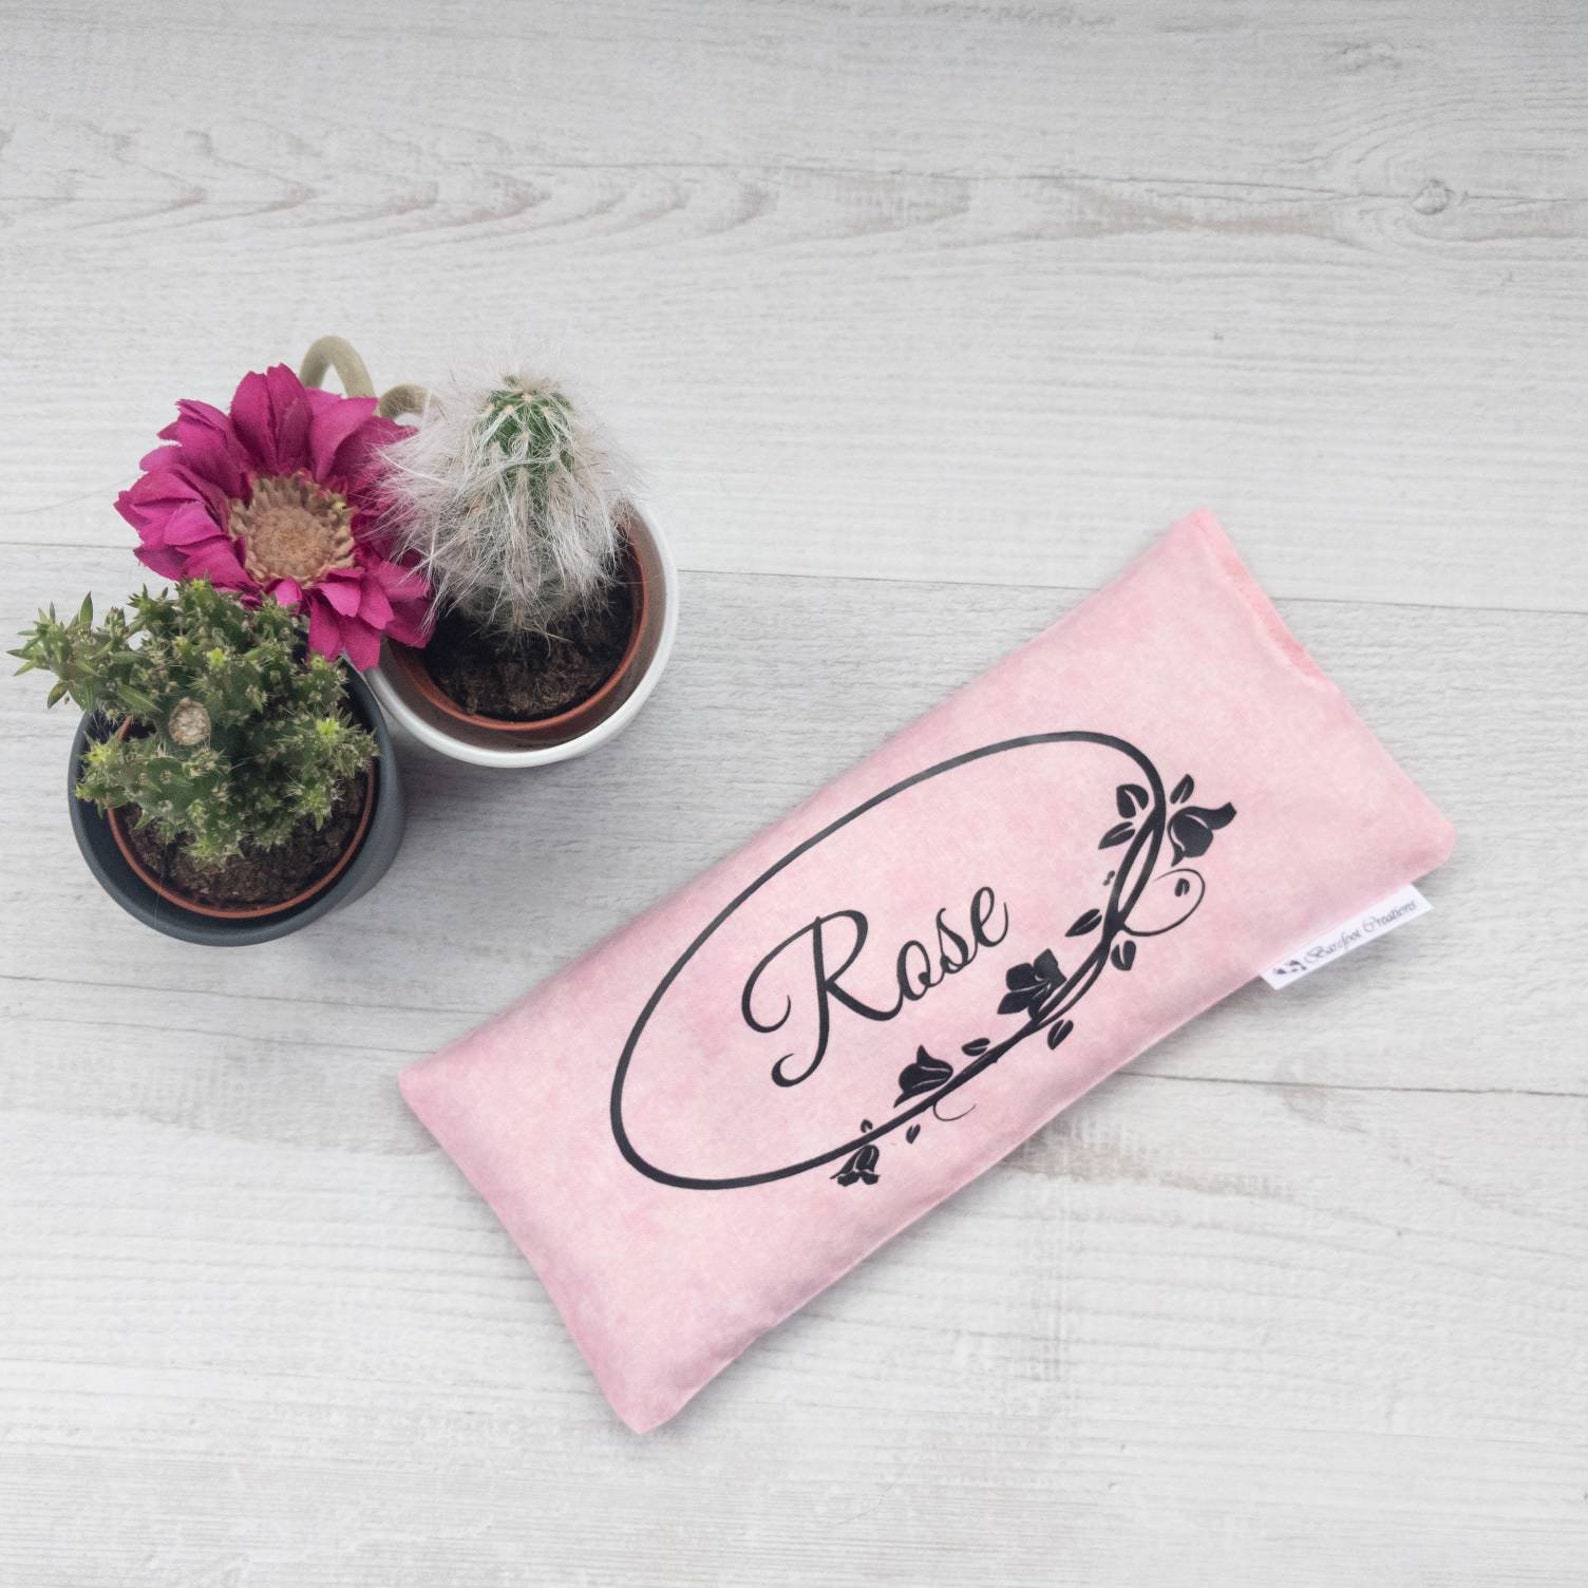 Lavender Eye Pillow - Personalized Yoga Gift for Her